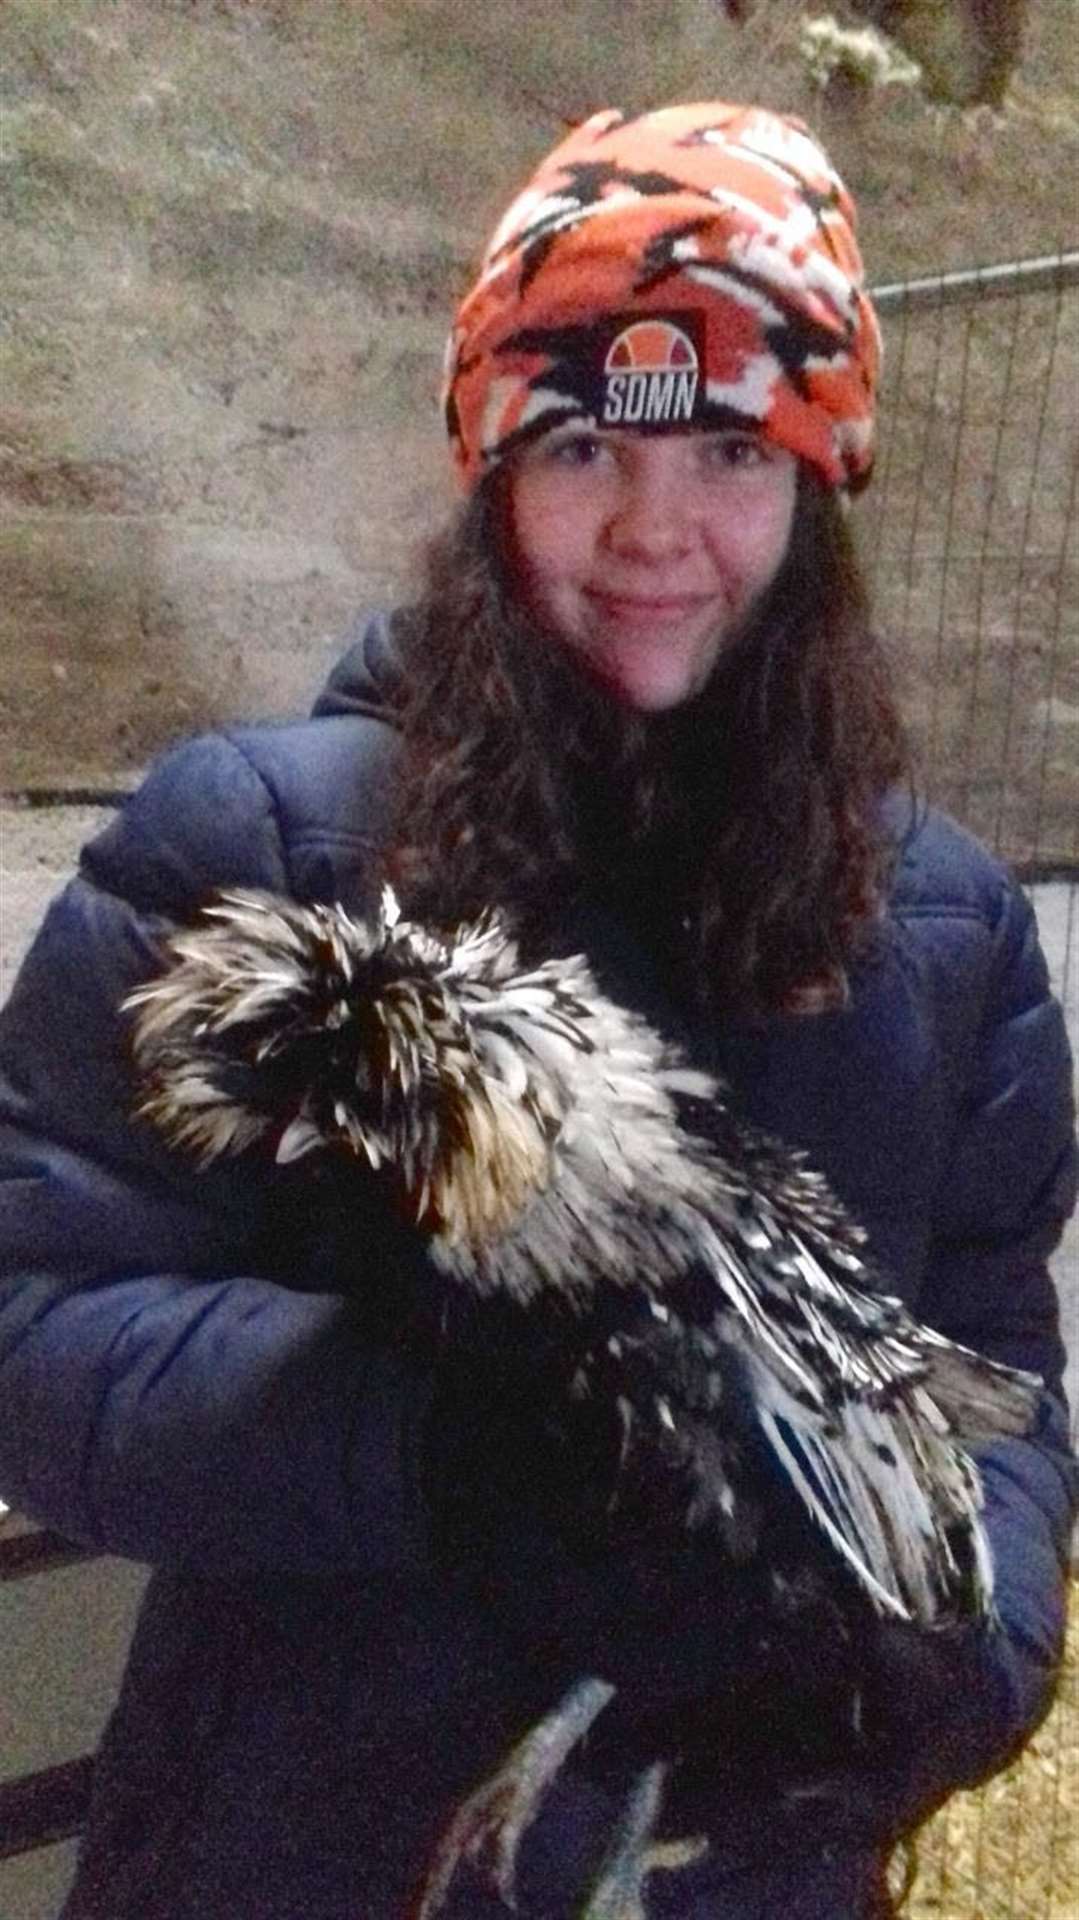 Kayleigh is pictured with some of the hens she cares for.